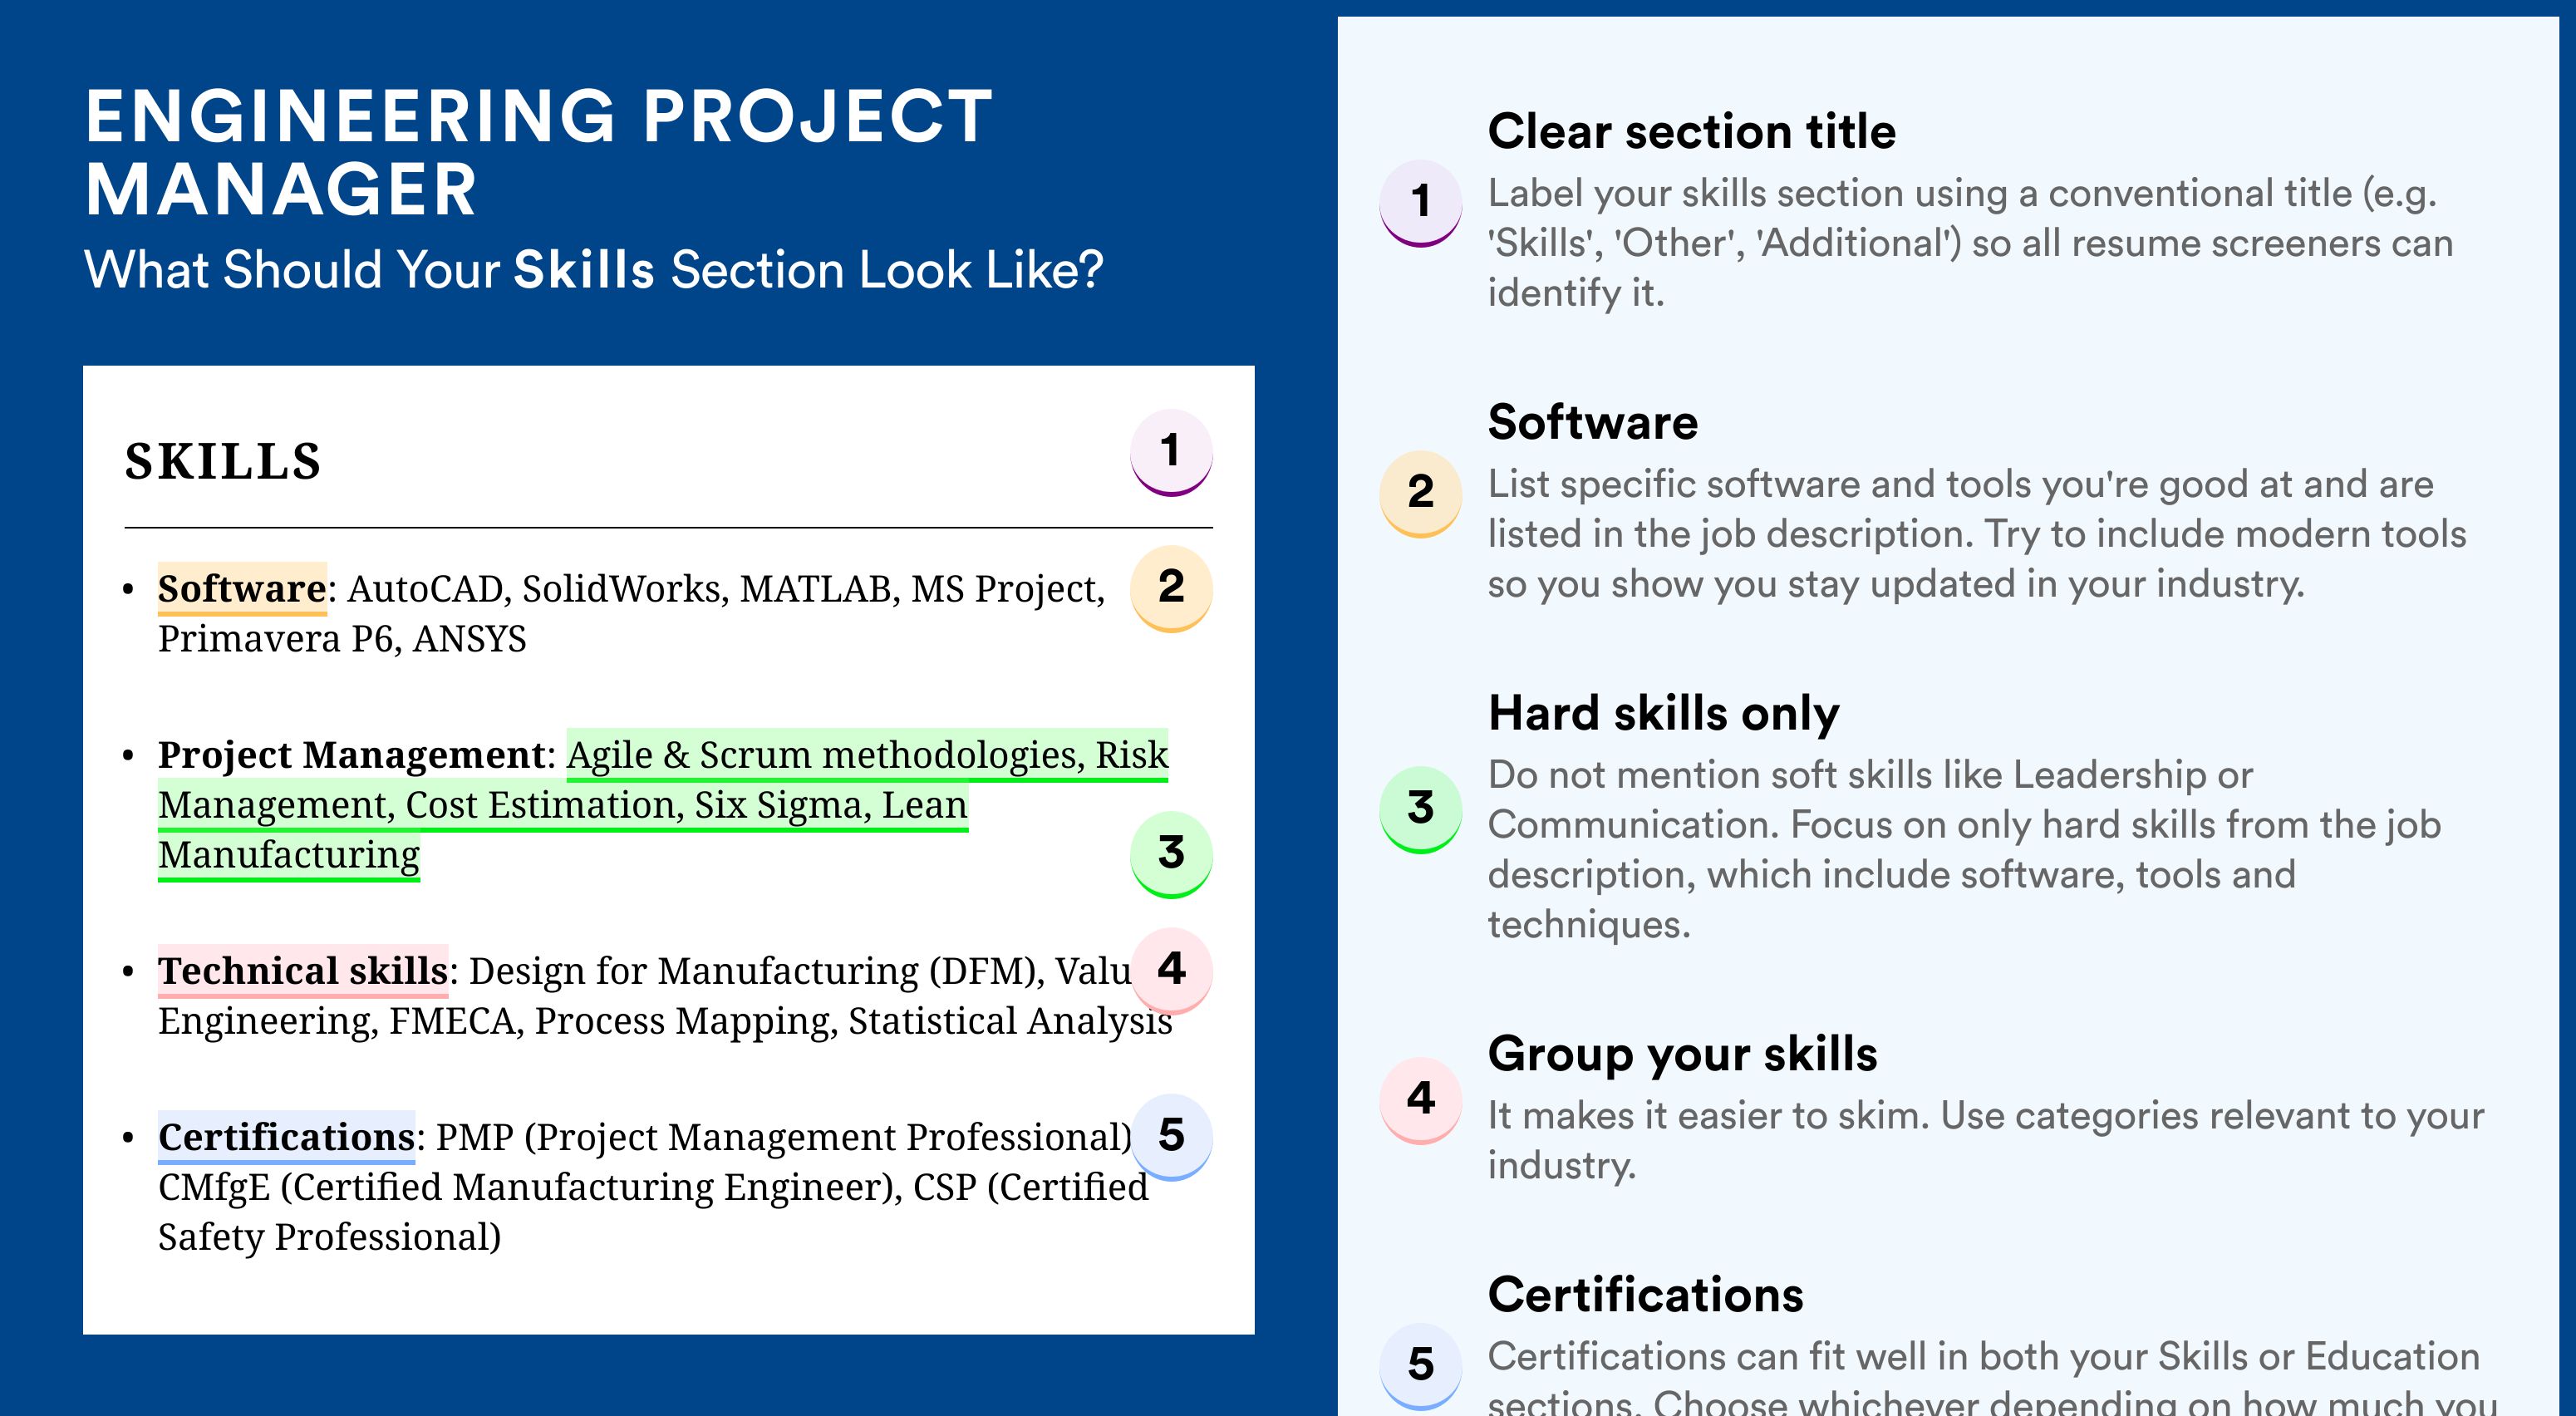 How To Write Your Skills Section - Engineering Project Manager Roles